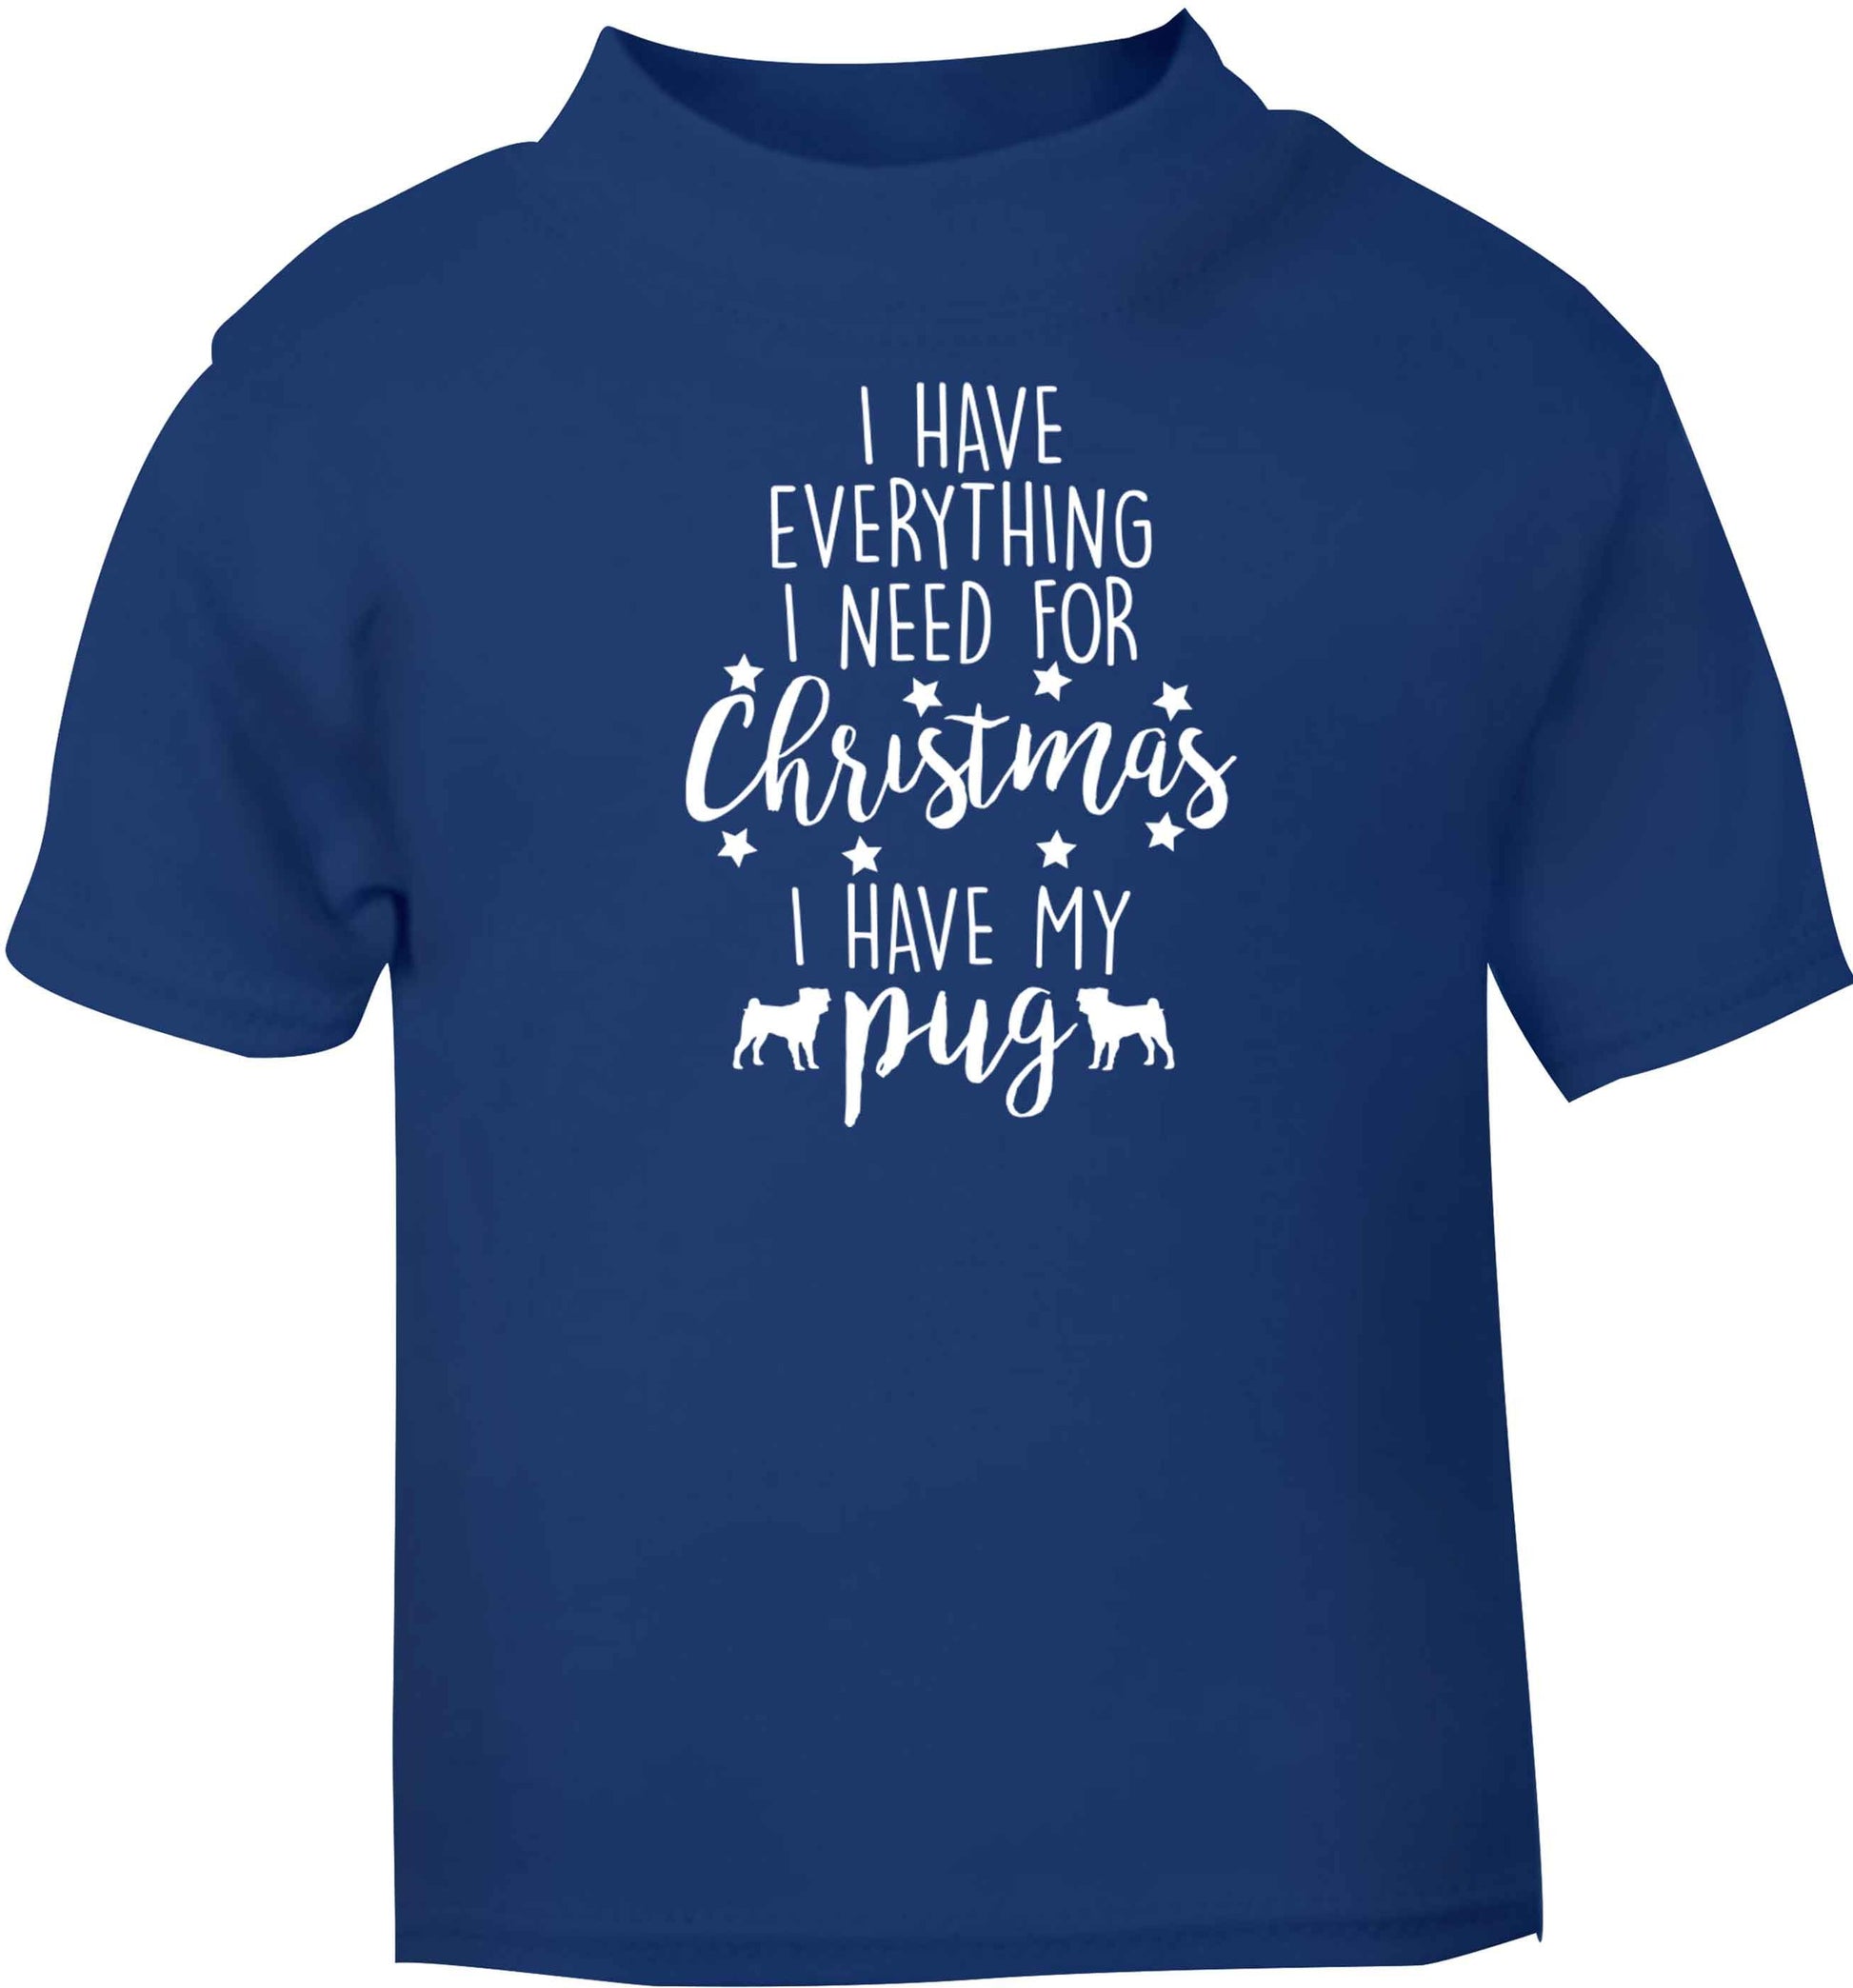 I have everything I need for Christmas I have my pug blue baby toddler Tshirt 2 Years